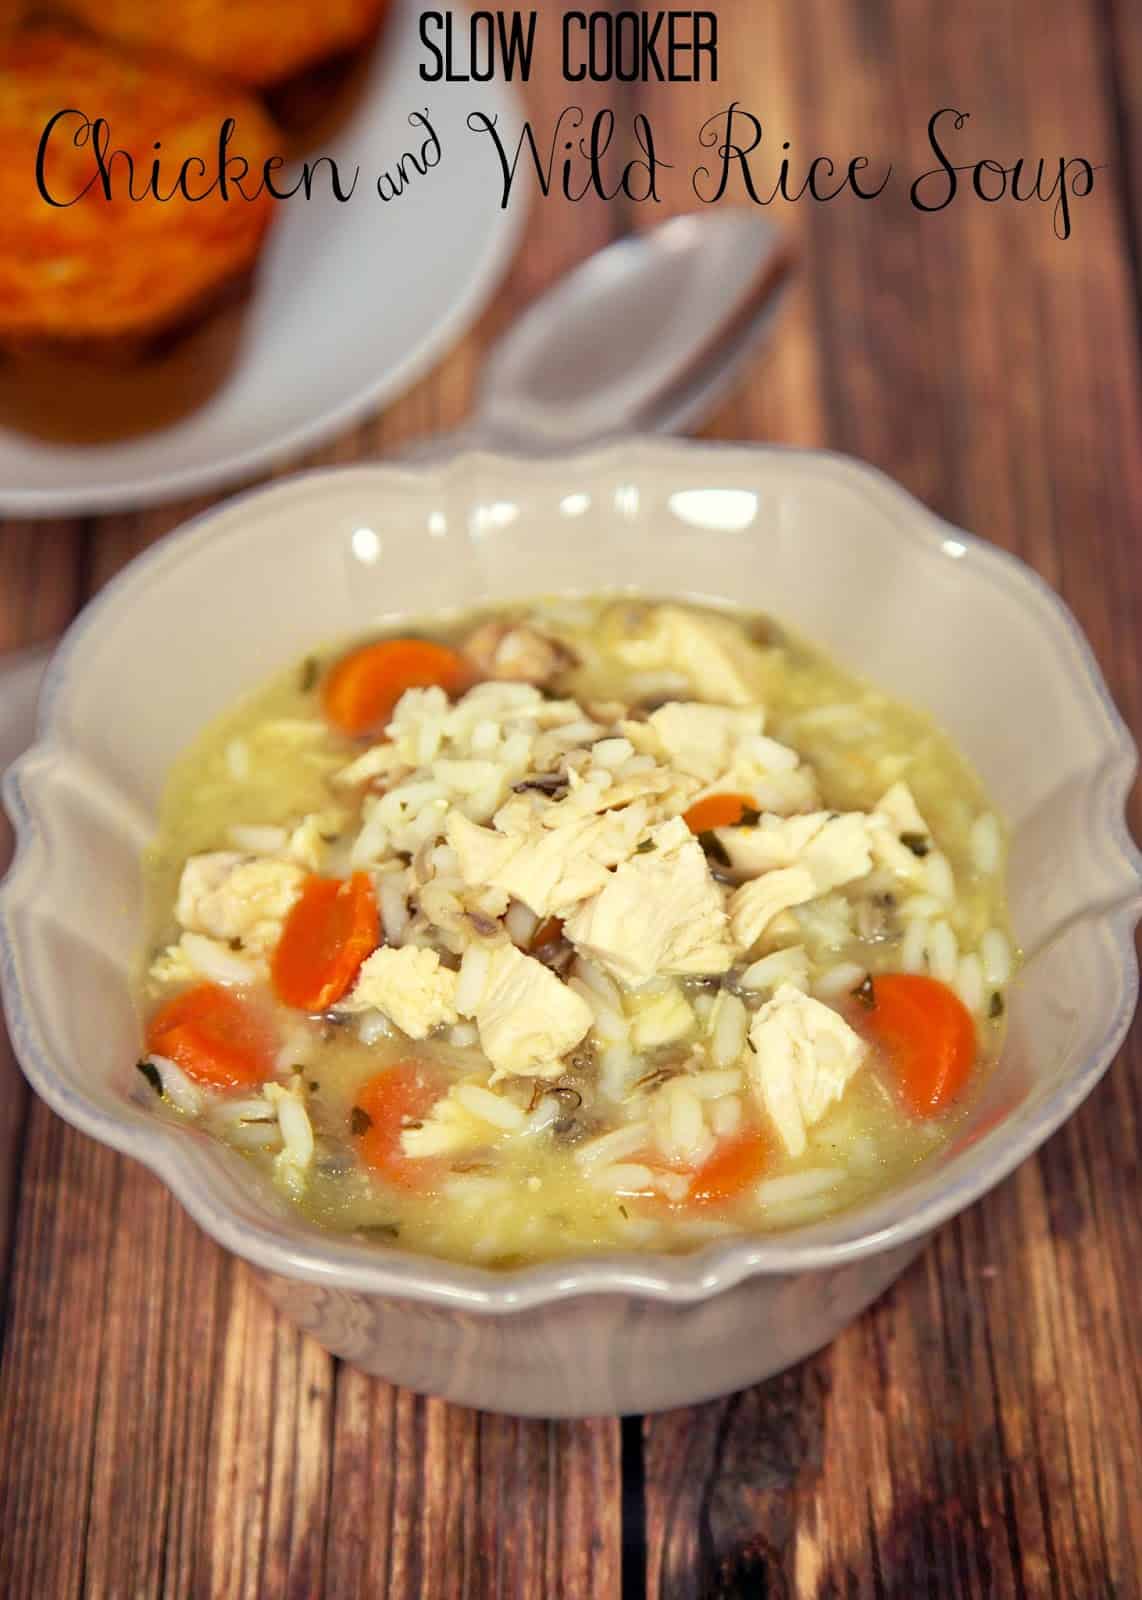 Slow Cooker Chicken and Wild Rice Soup - chicken, carrots, long grain and wild rice, and chicken broth - cooks all day in the slow cooker. Tastes great. Freezes well too!